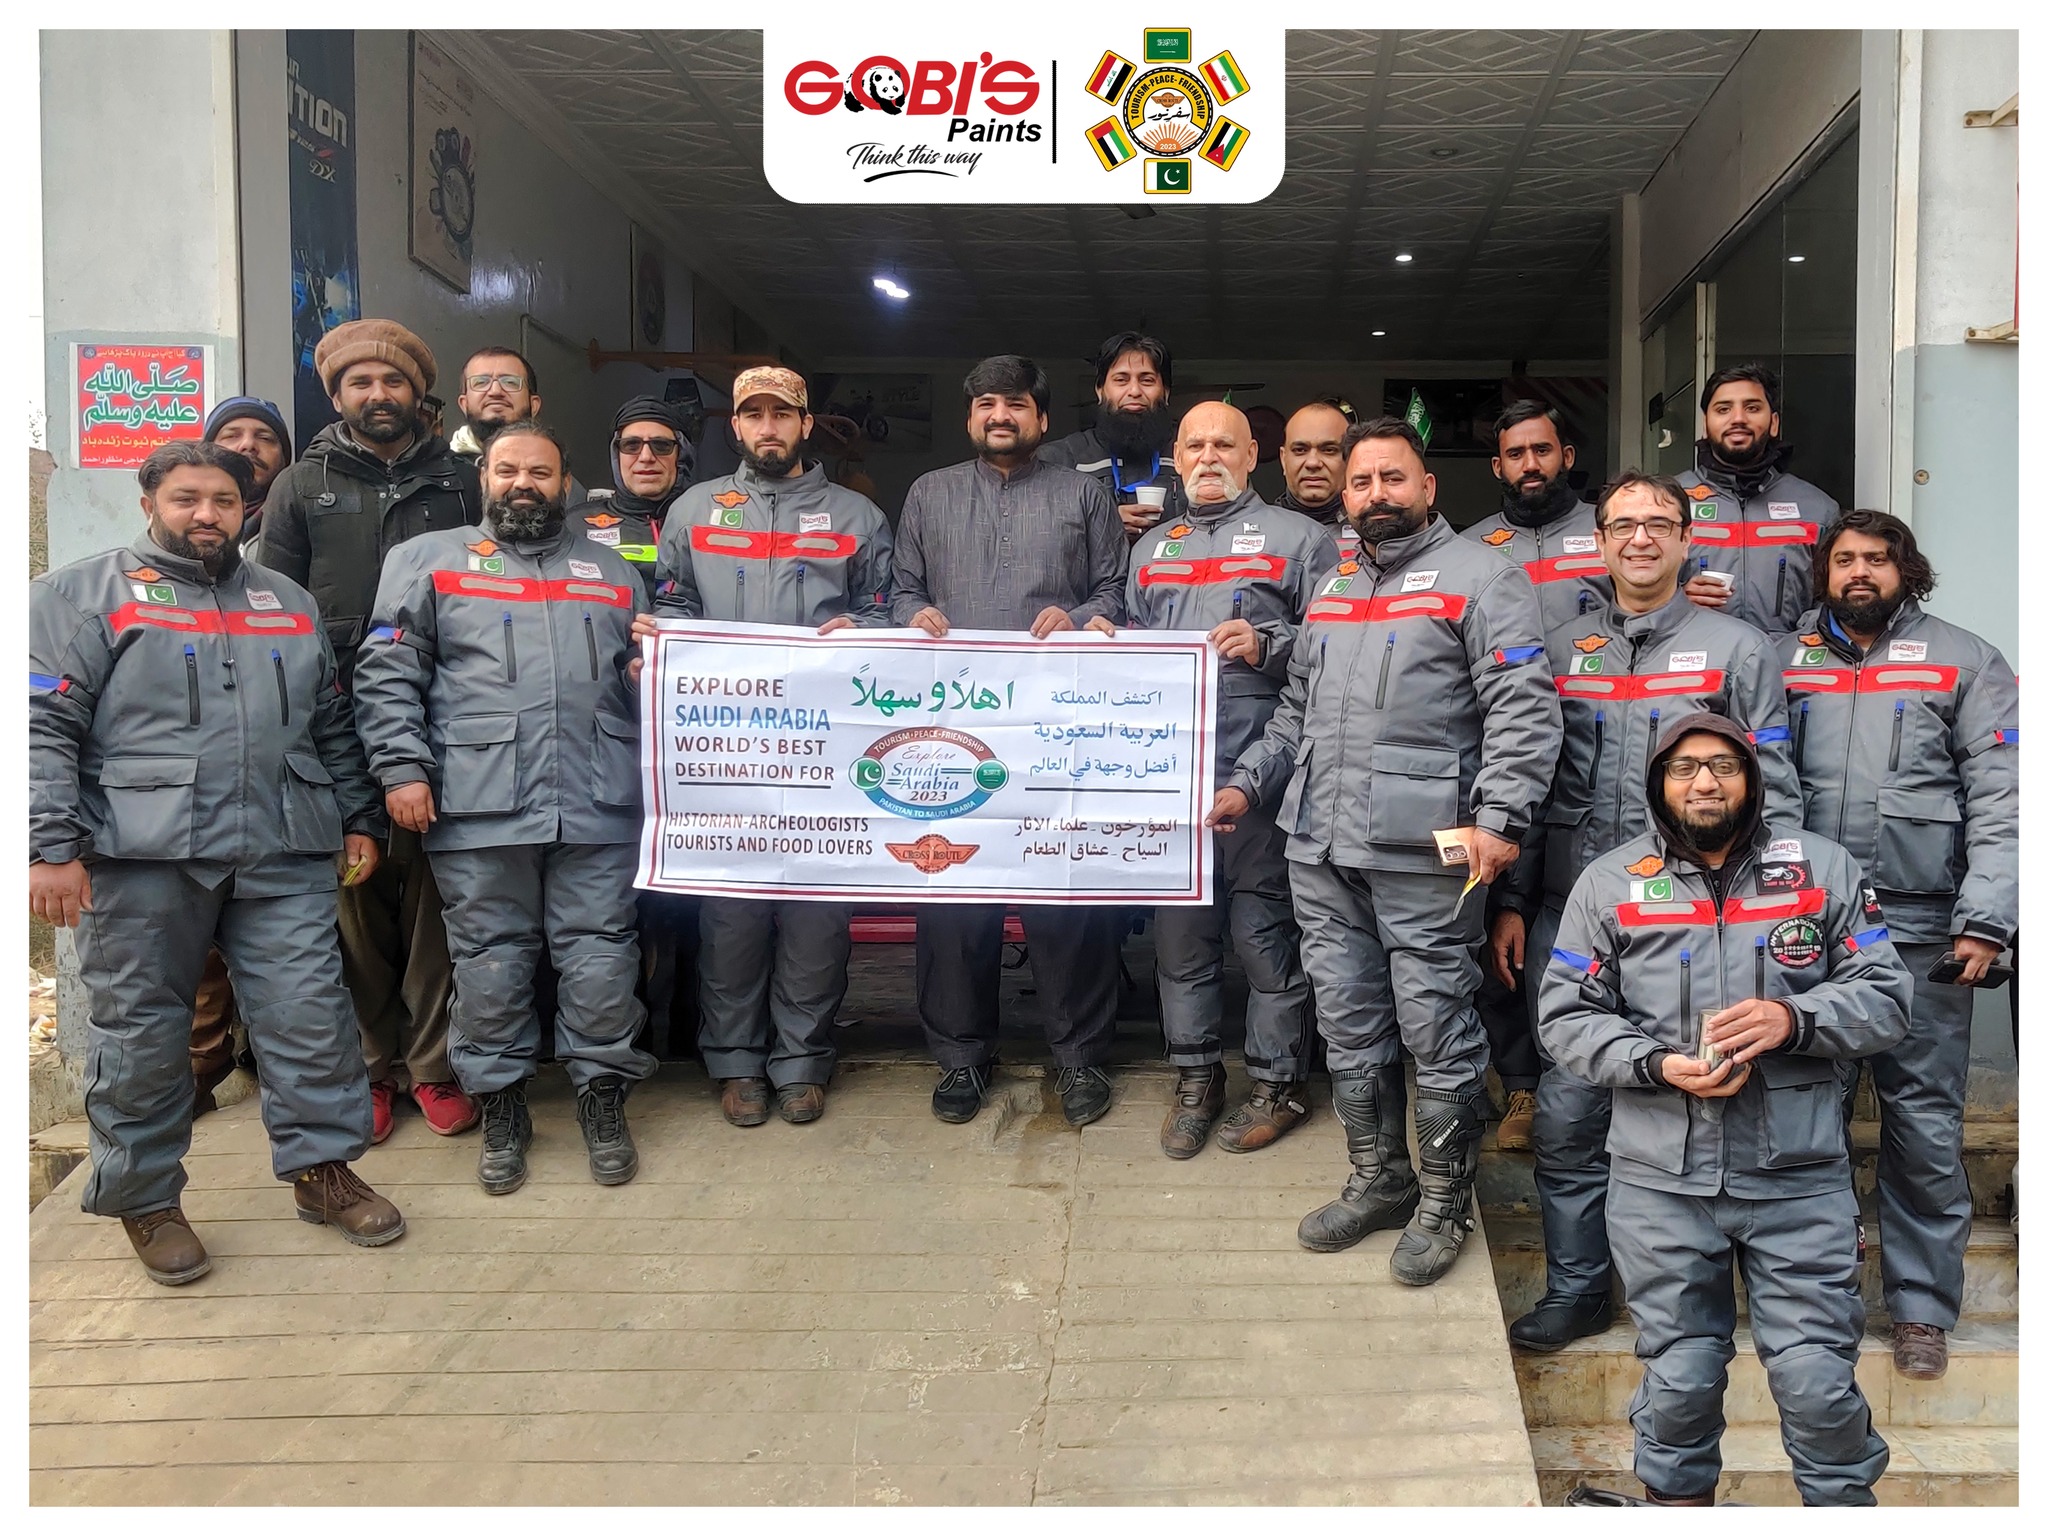 Gobi’s Paints is pleased to have sponsored and supported the journey of the biker group safr e noor, from Pakistan to Saudi Arabia